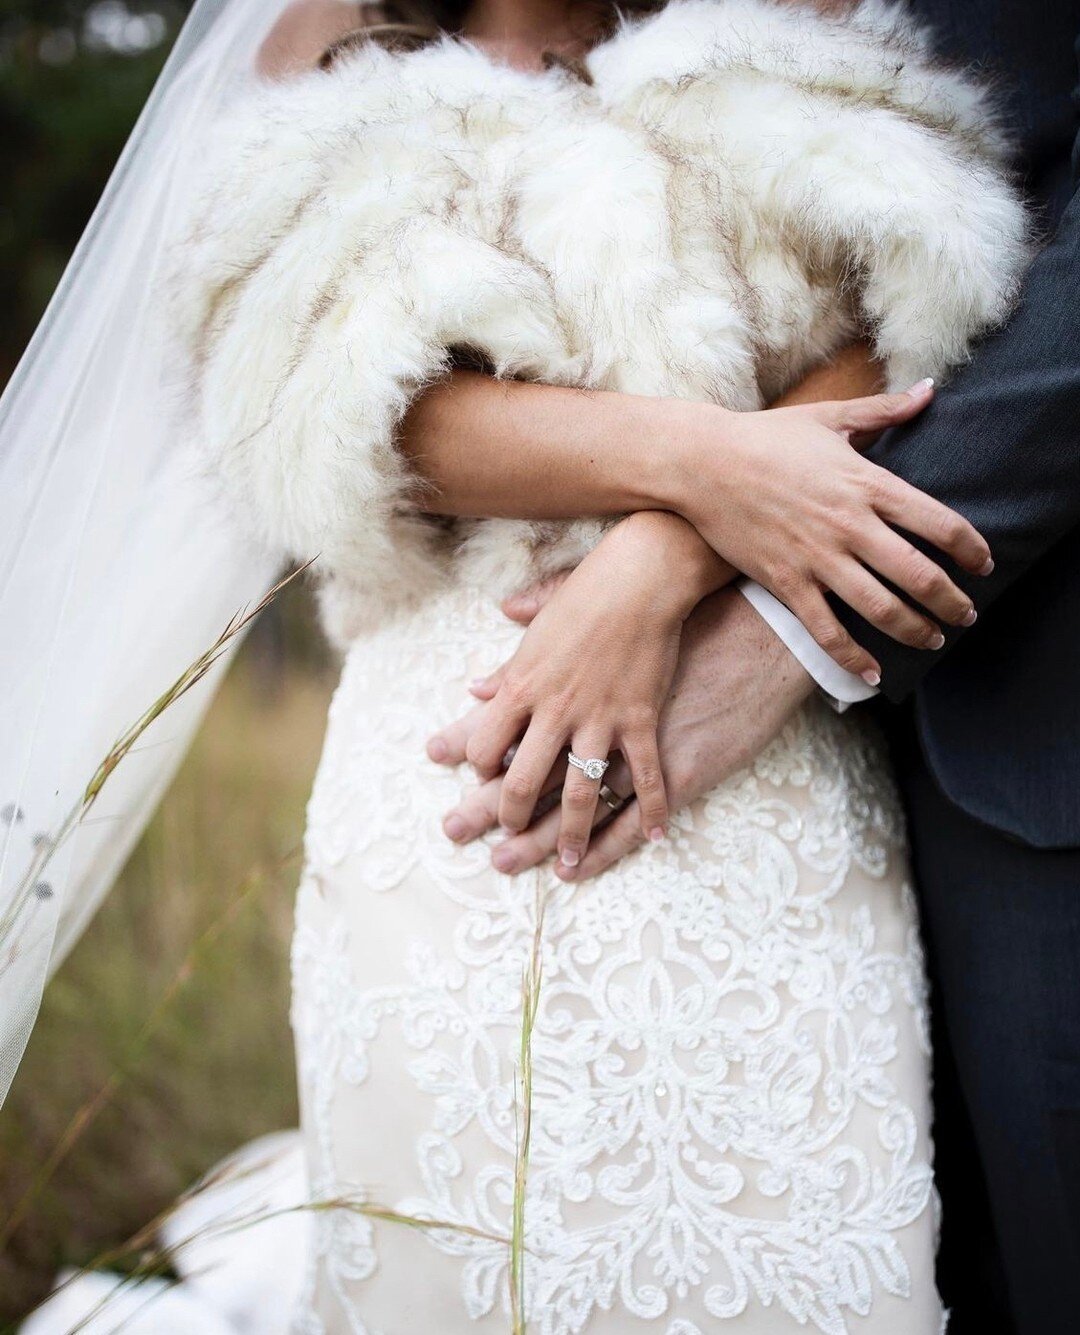 Winter brides with fur wraps 😍 Yes, please! Anything to stay warm AND fashionable 💁🏽&zwj;♀️⁠
⁠
Photographer: @live_free_photo